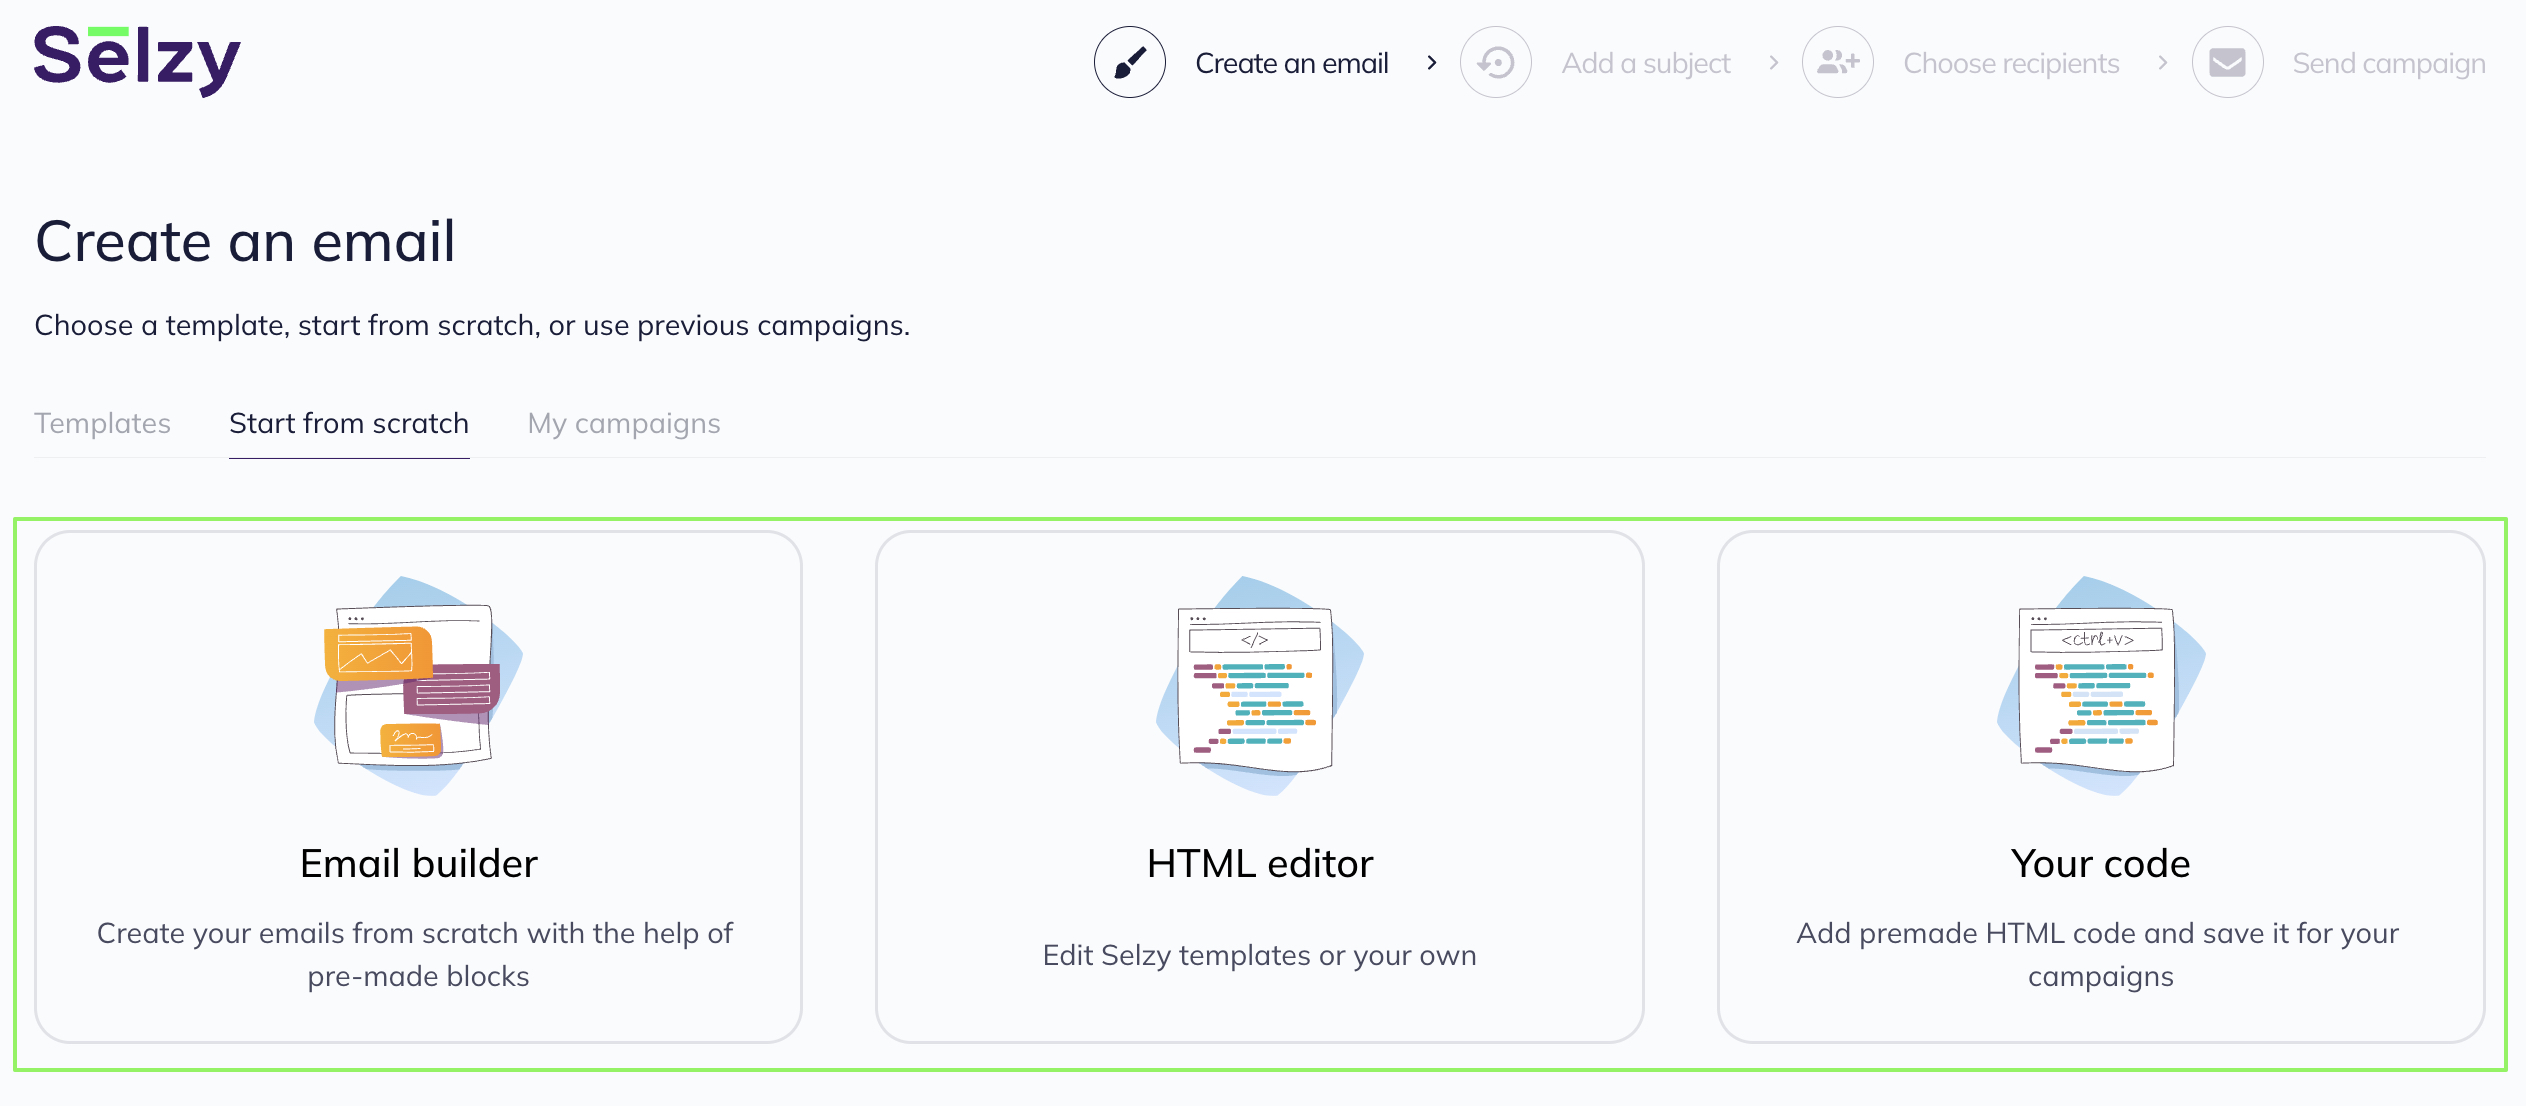 Options on the Start from scratch tab: Email builder, HTML editor, and Your code